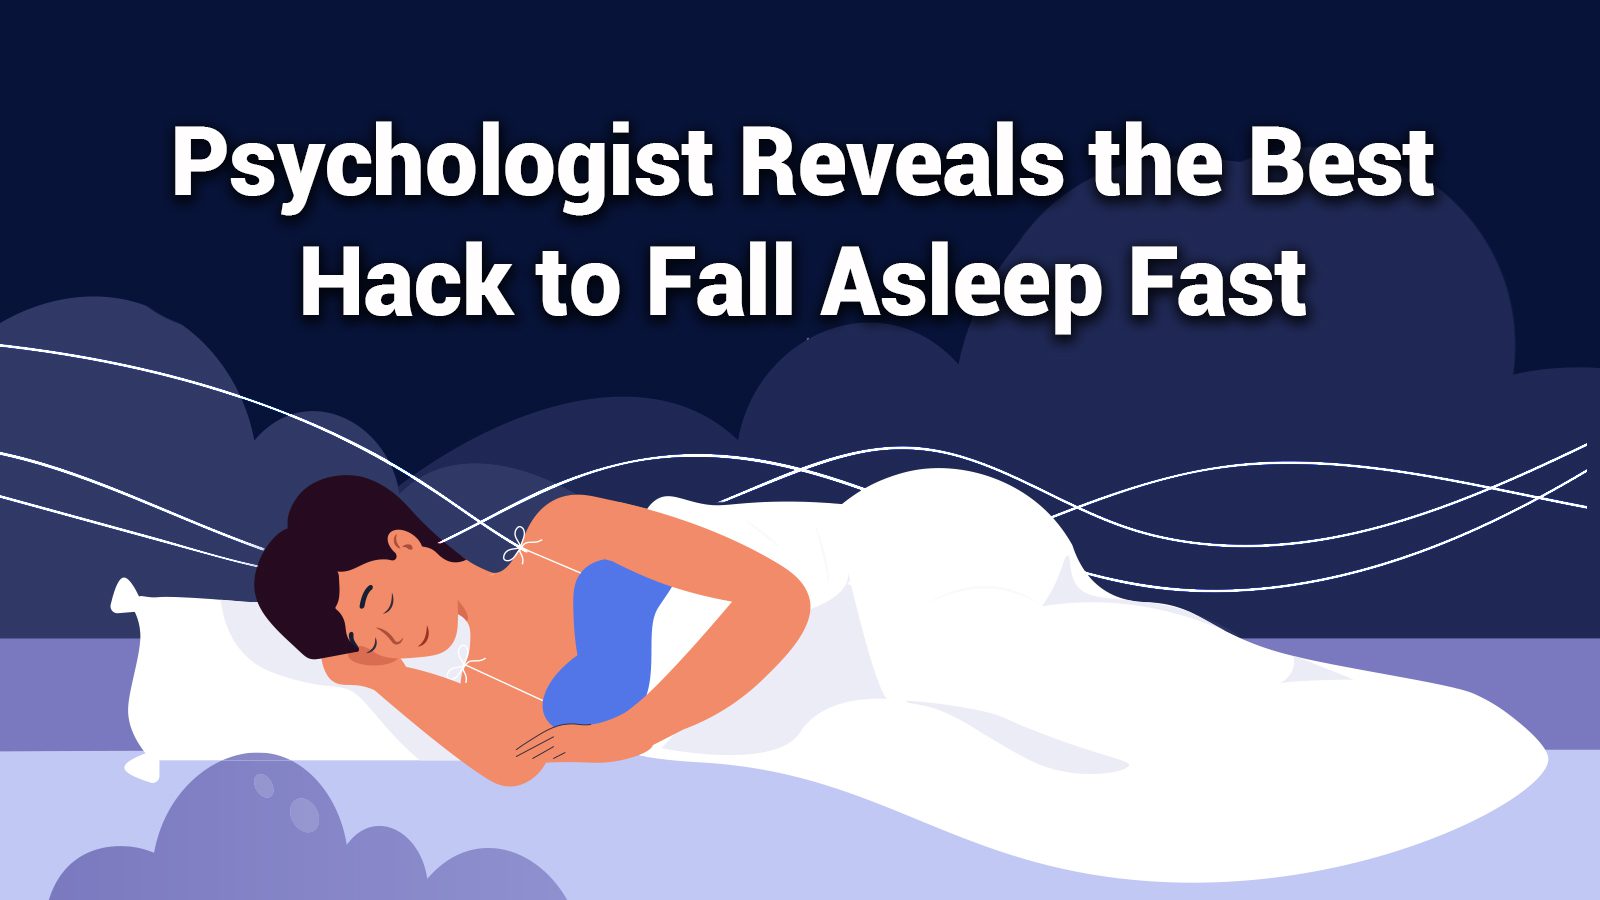 Psychologists Reveal the Best Hack to Fall Asleep Fast